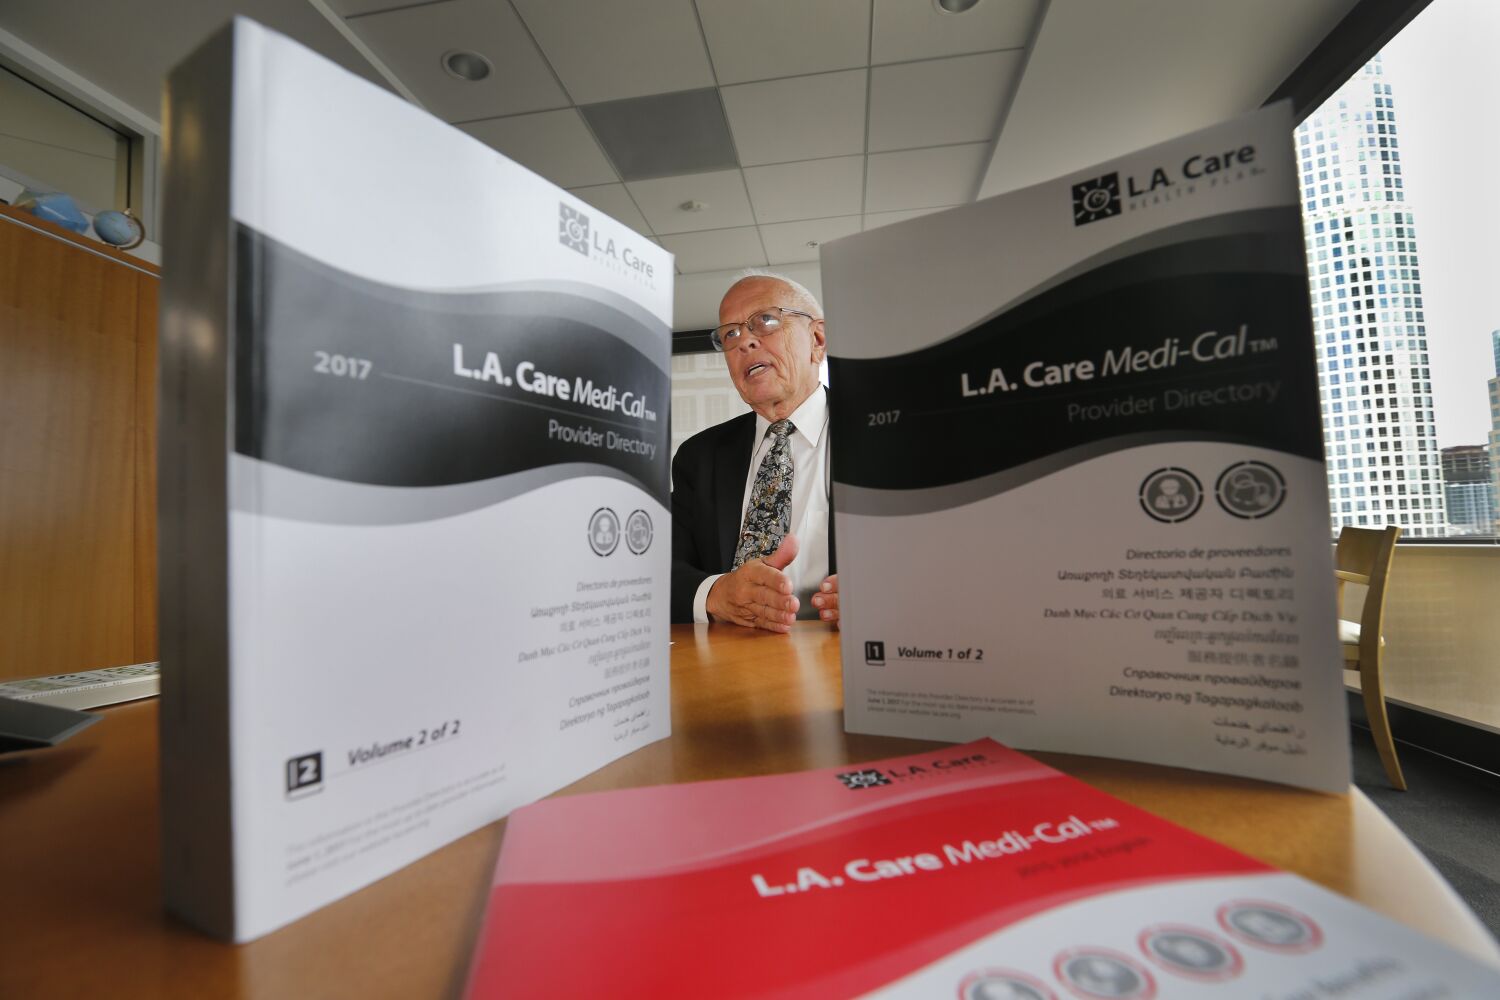 Hospitals complain problems persist a year after L.A. Care was hit with record fines